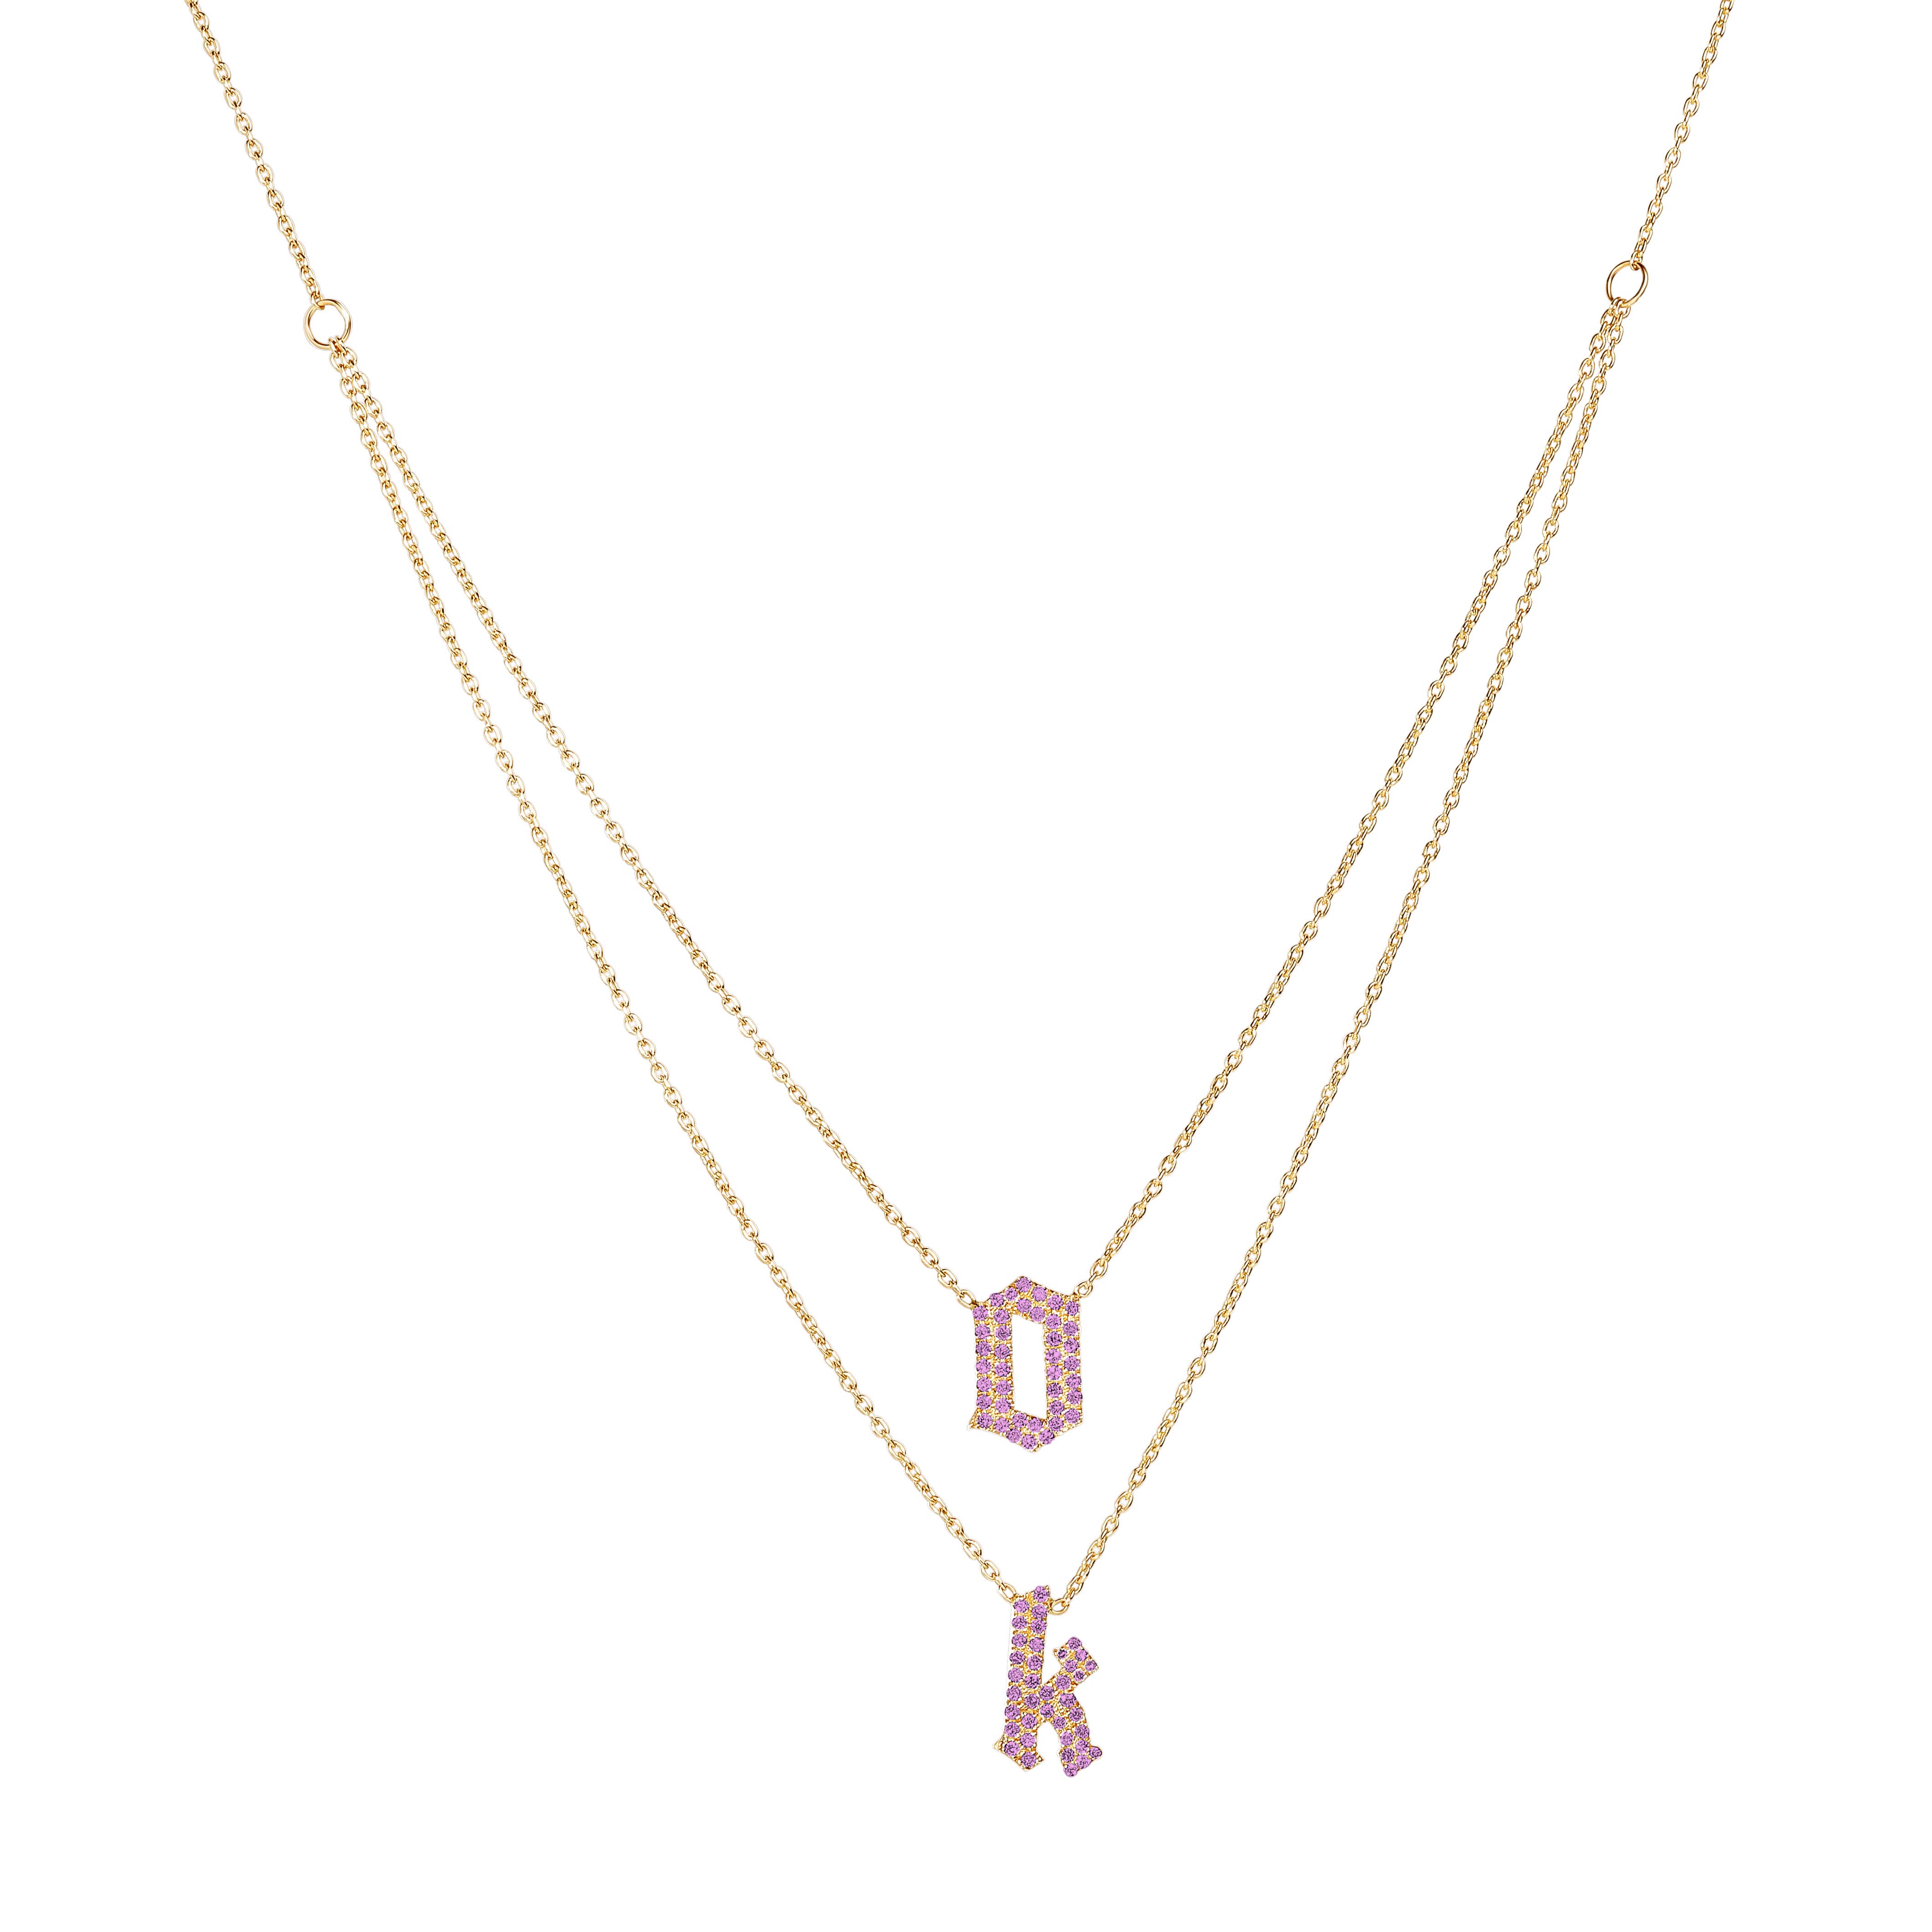 Layered Birthstone Pave Gothic Initials Necklace